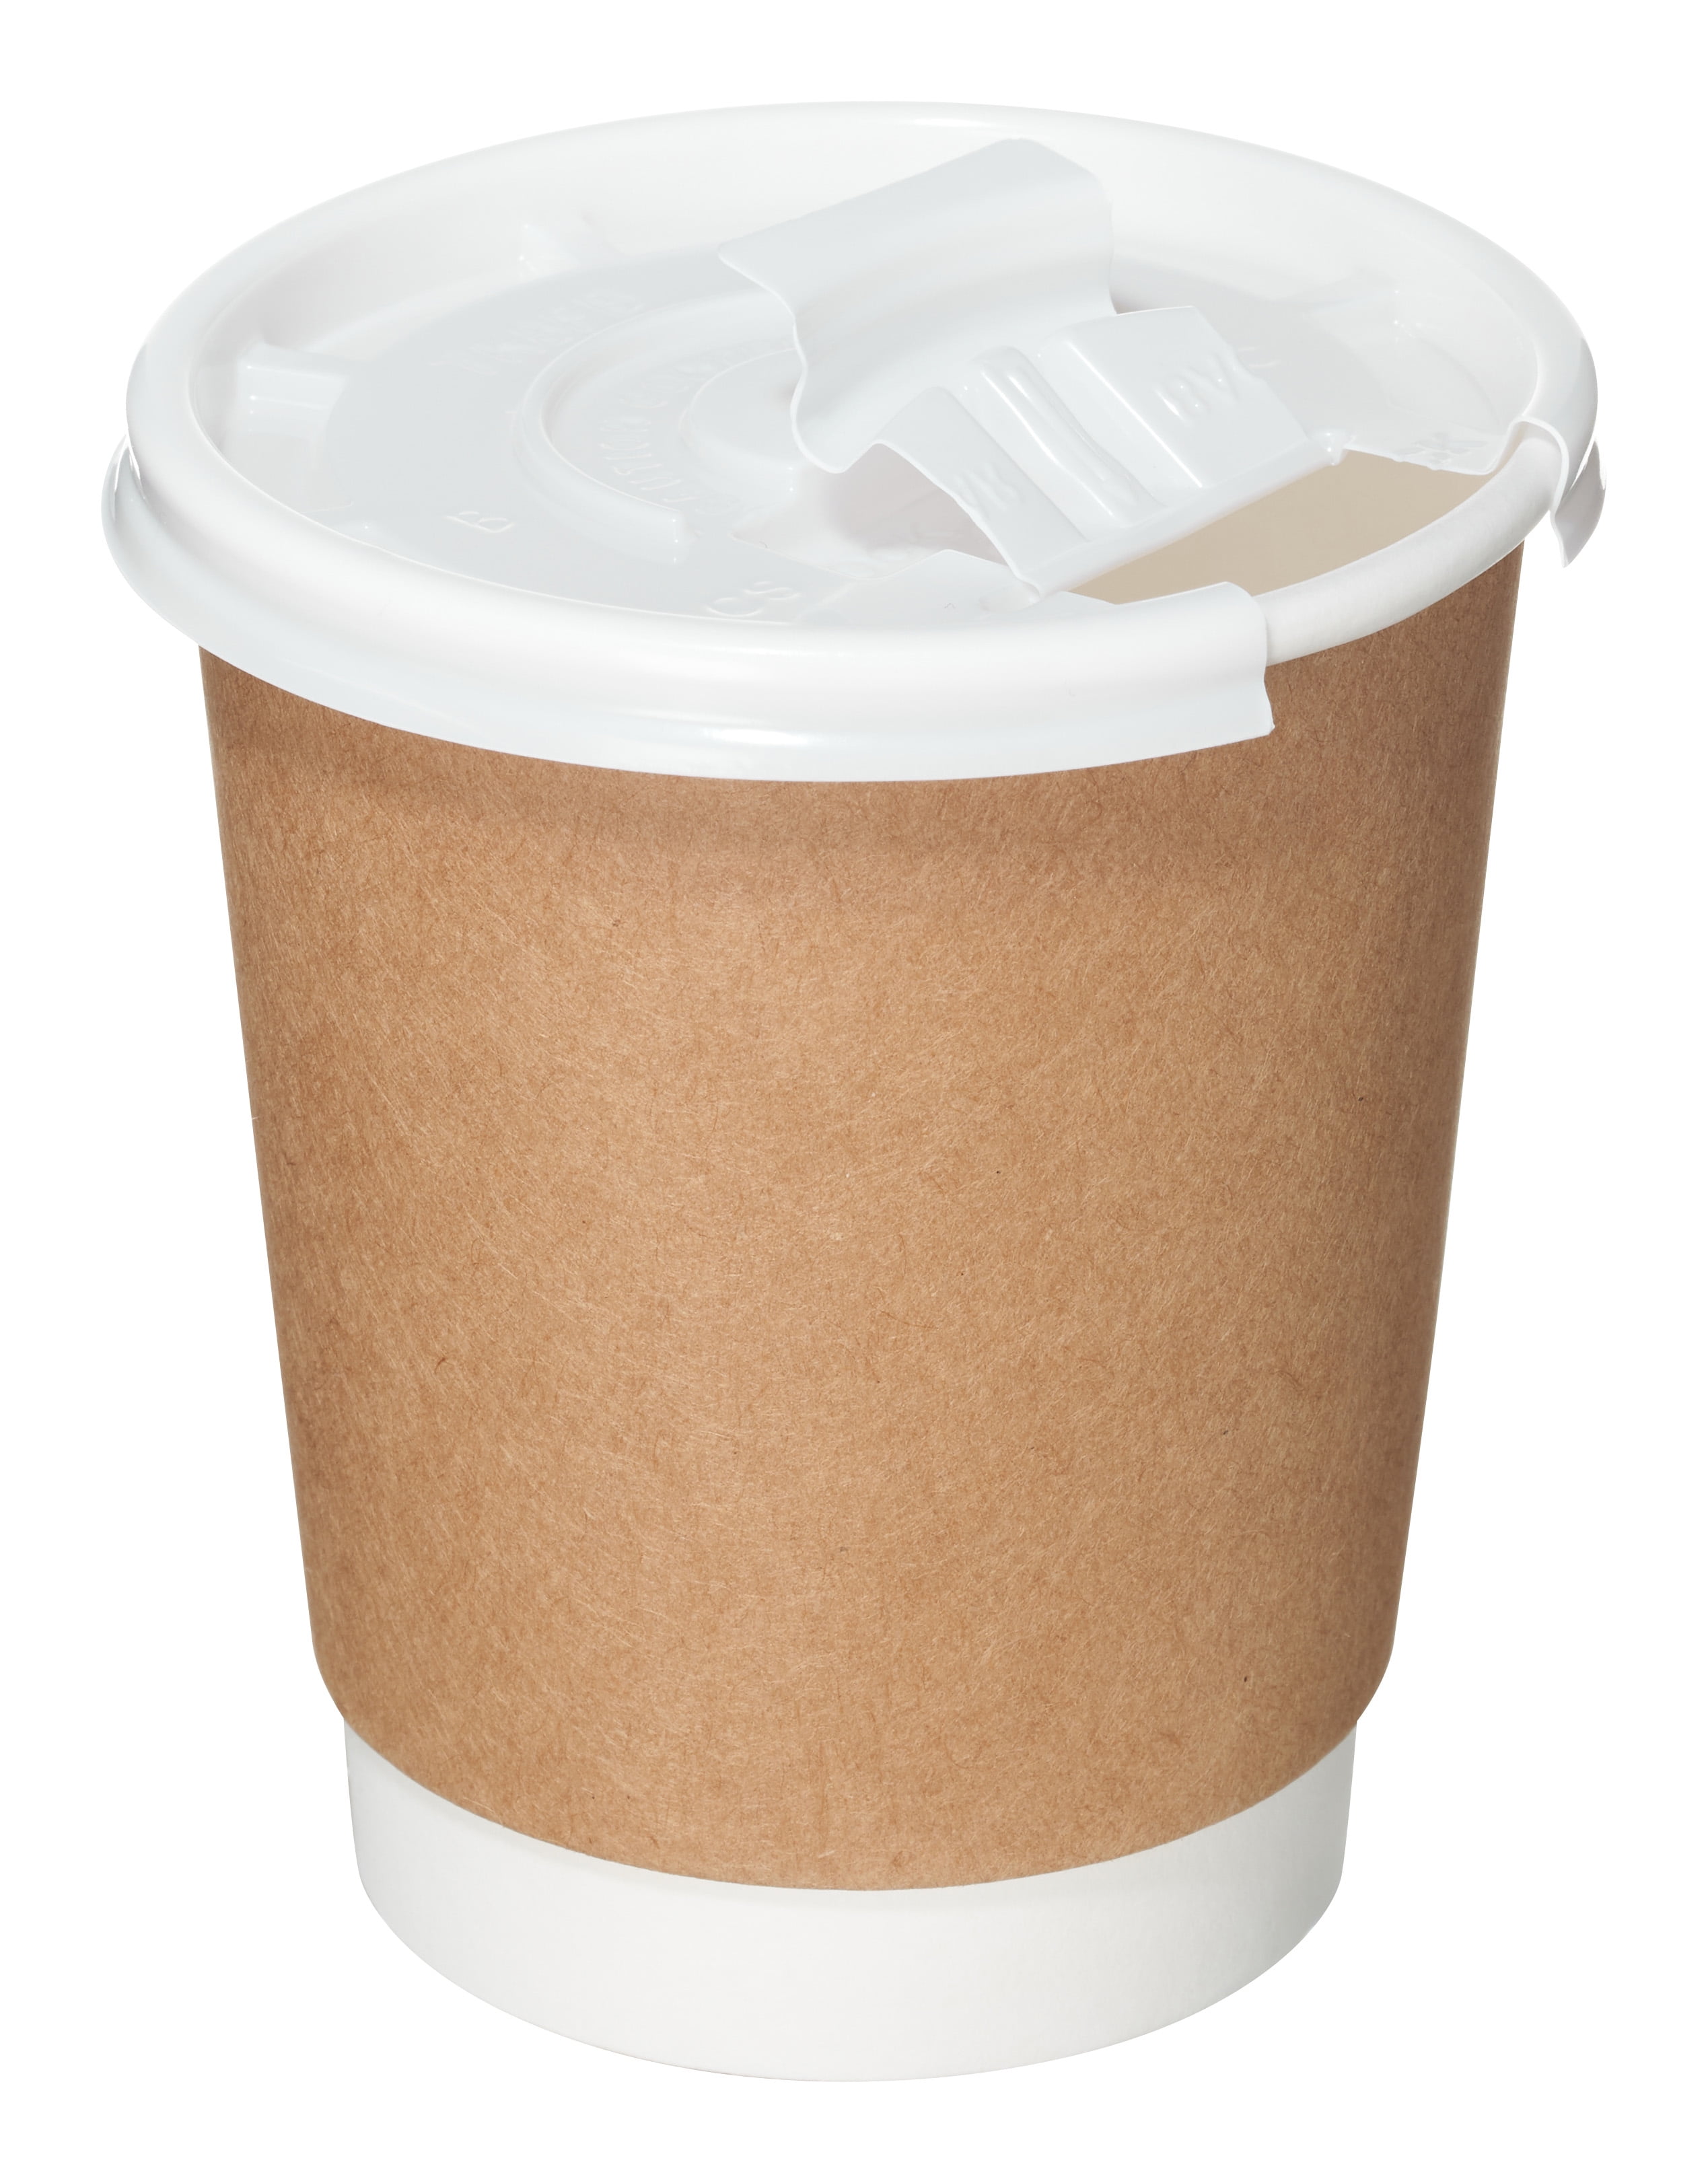 50 x 8oz Disposable Paper Coffee Cups & White Sip Lids Ripple Weave Hot Drinks 